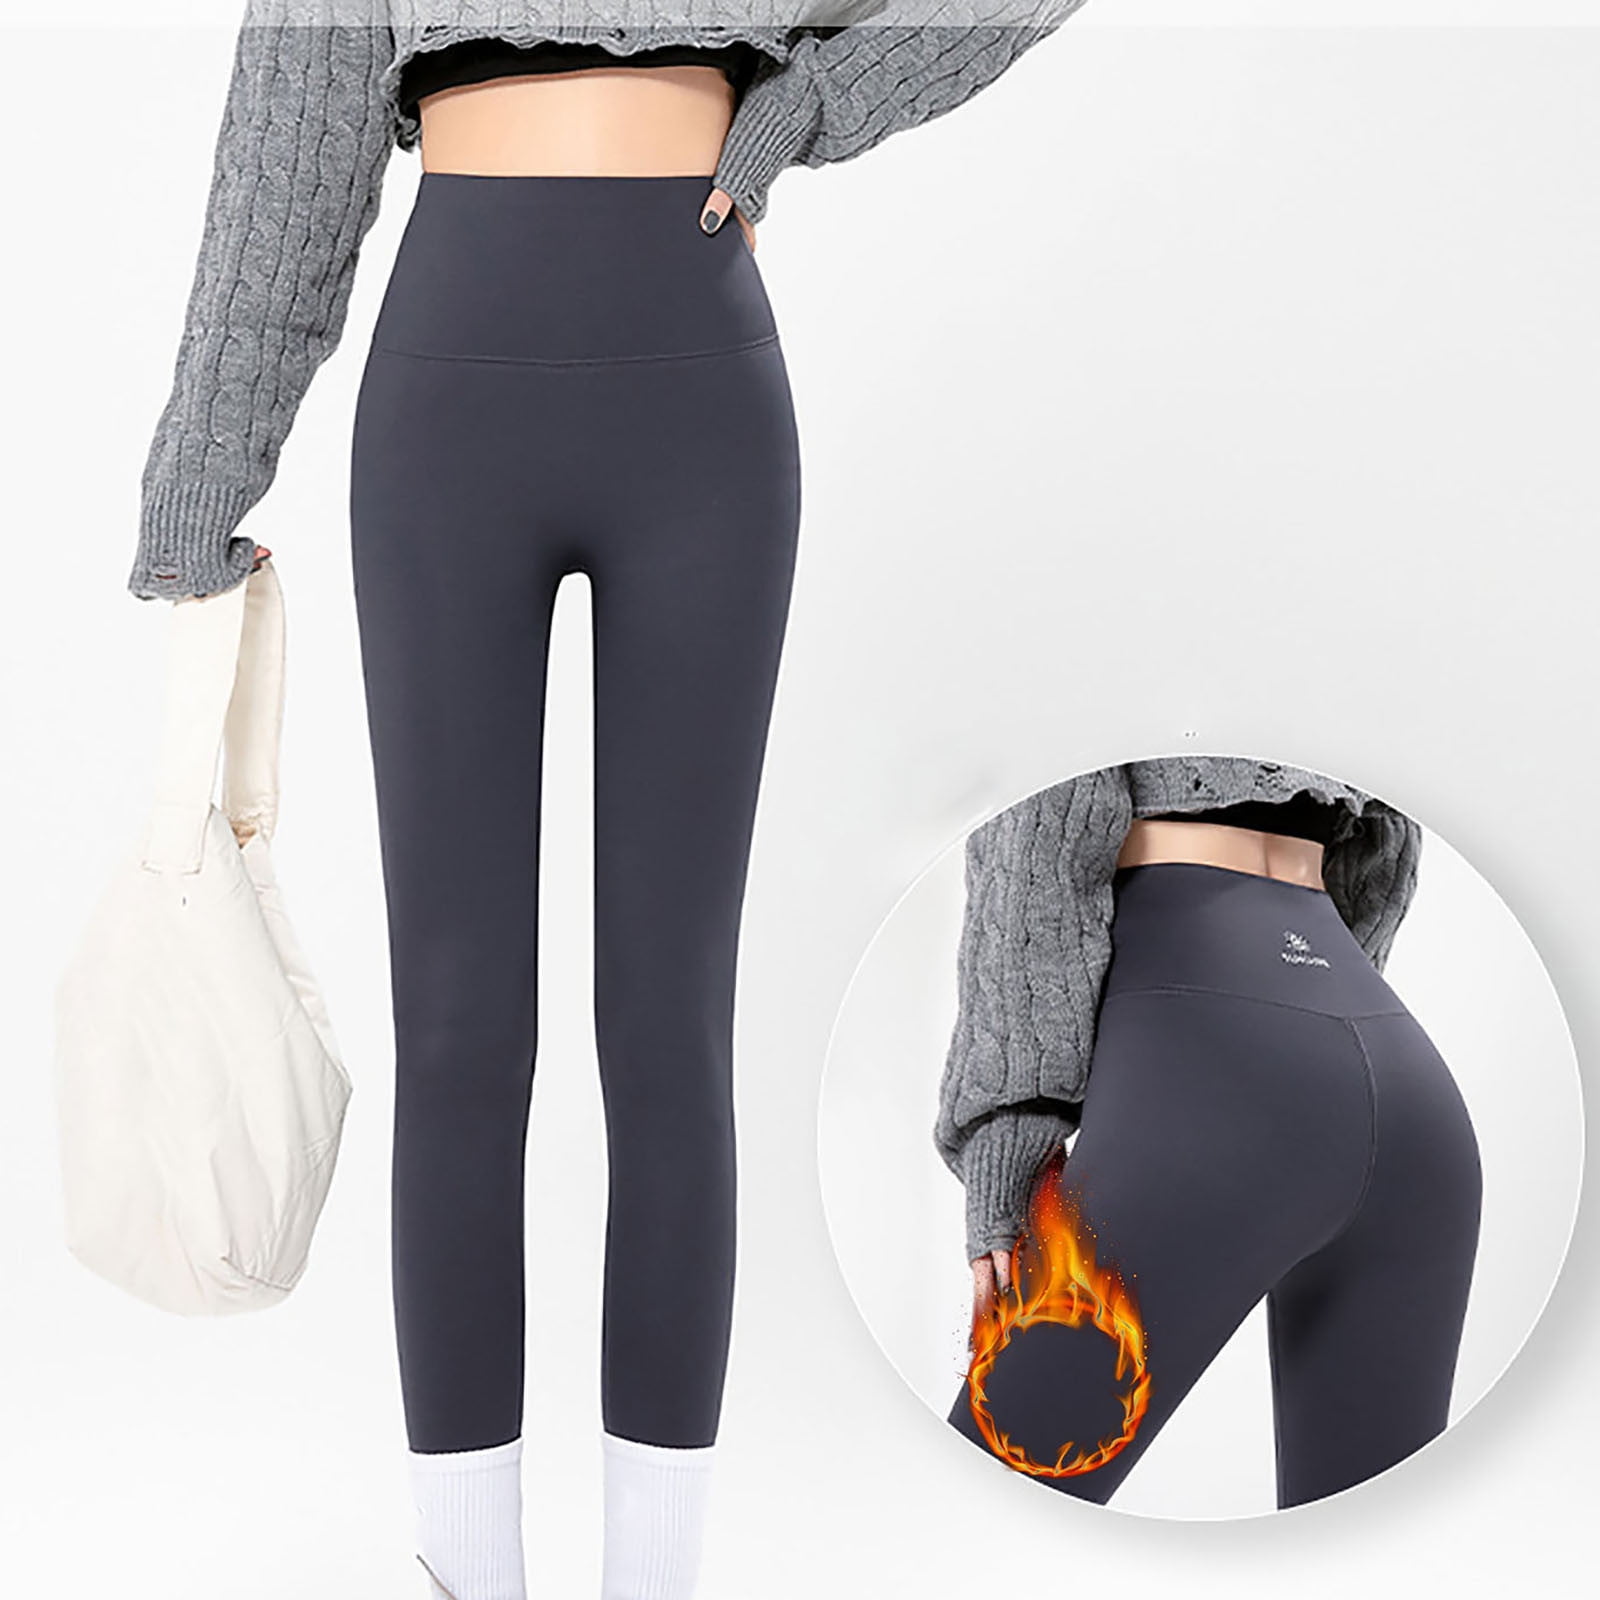 shoppers going mad for £10 lined thermal leggings that 'keep warm'  and 'look extremely smart' - MyLondon